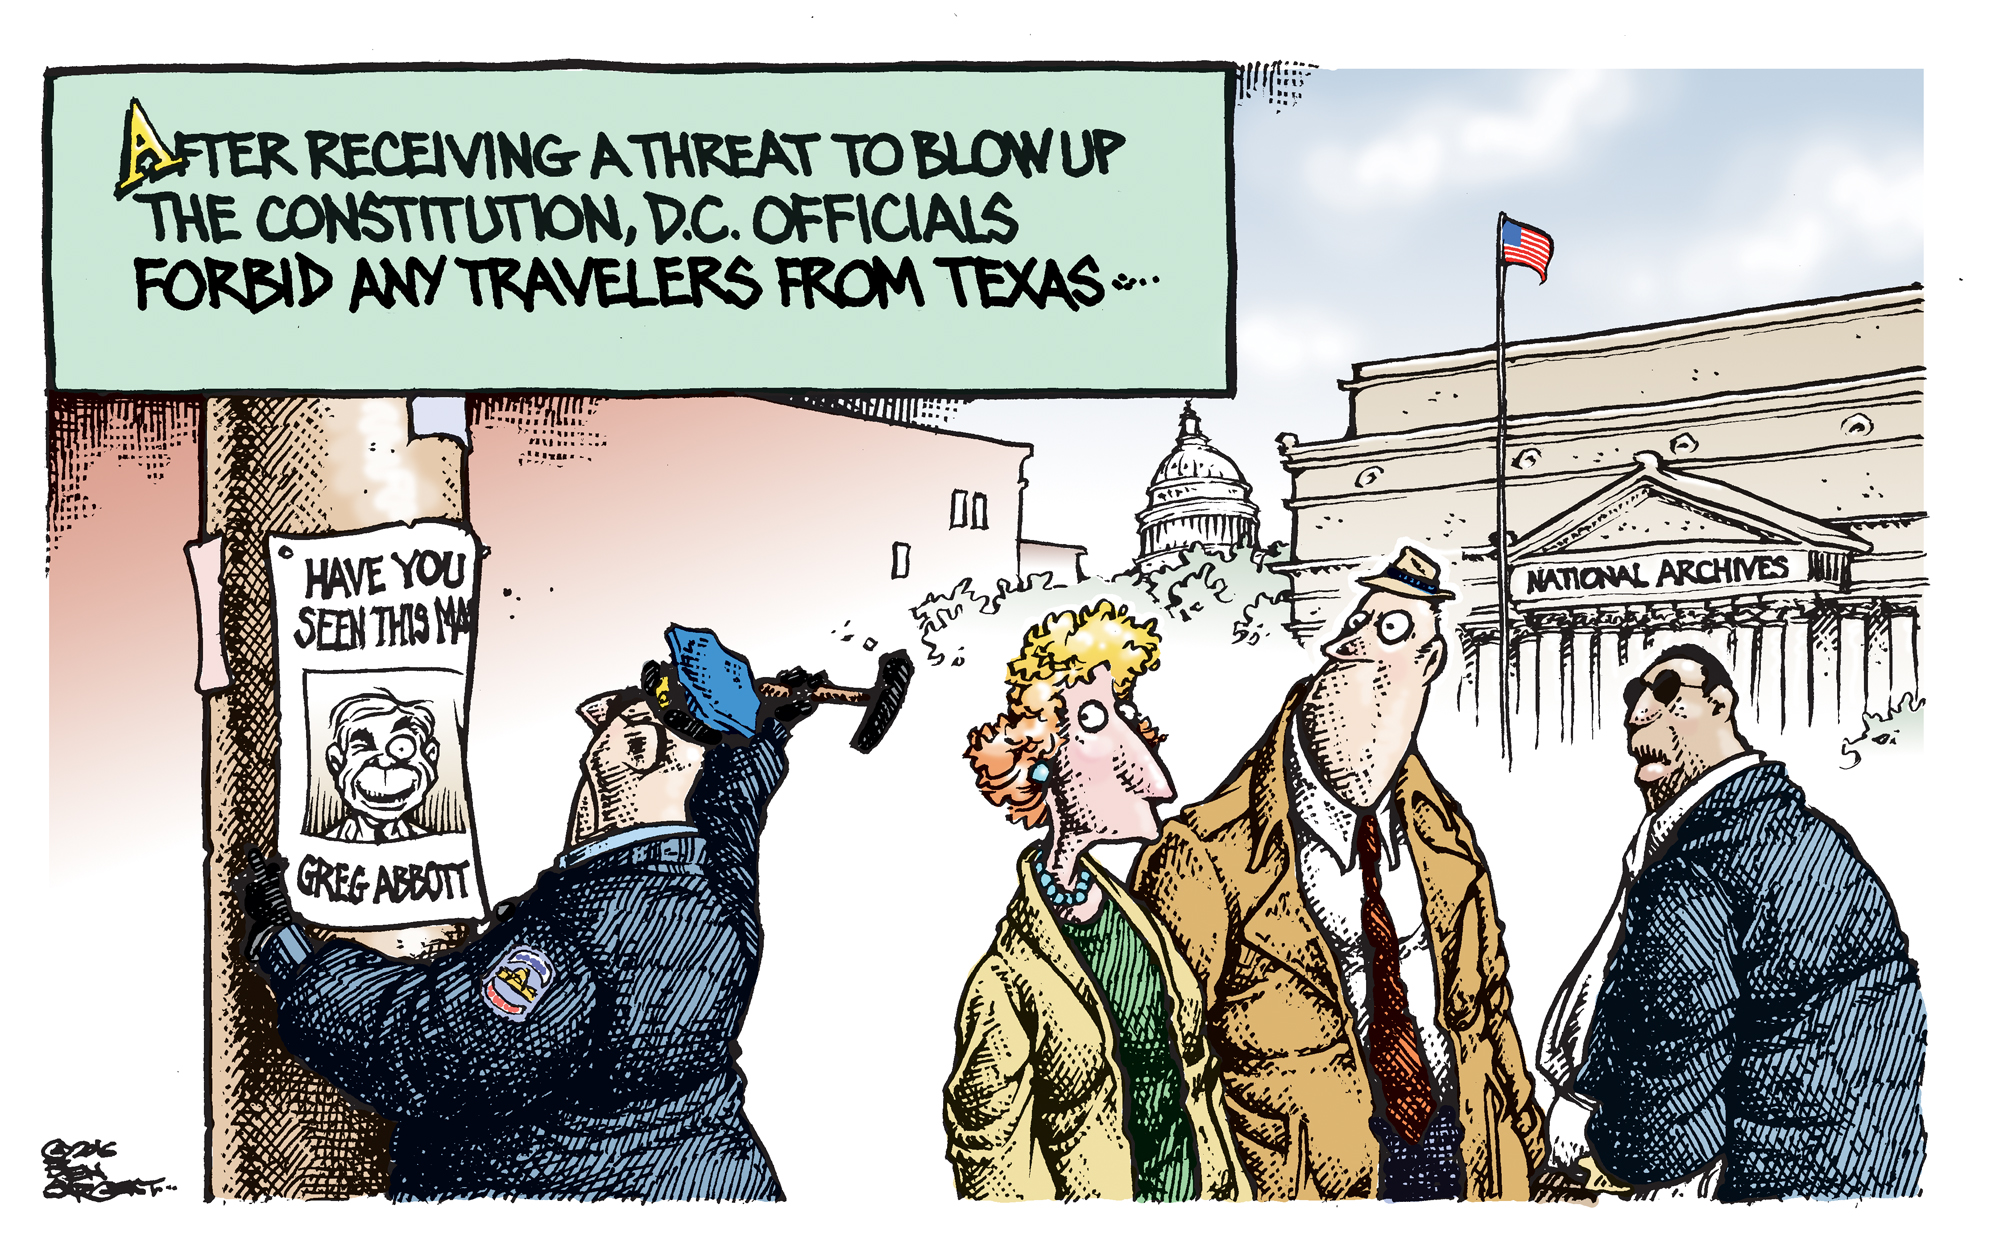 Loon Star State: D.C. Officials Forbid Any Travelers From Texas